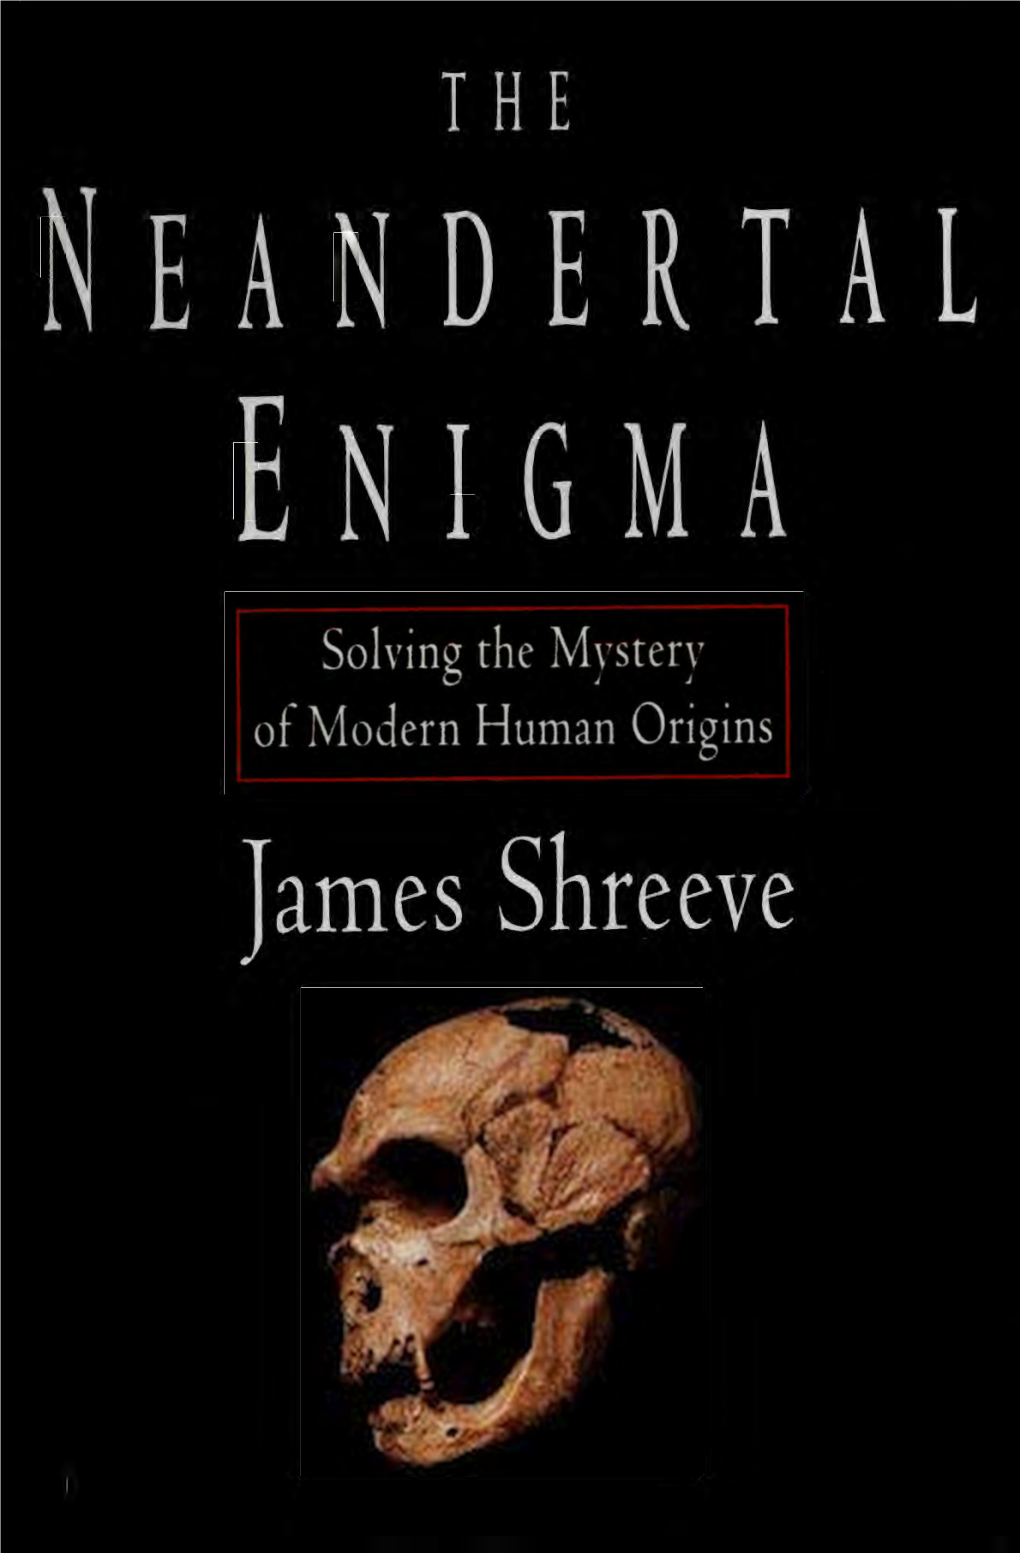 The Neandertal Enigma : Solving the Mystery of Modern Human Origins I by James Shreeve